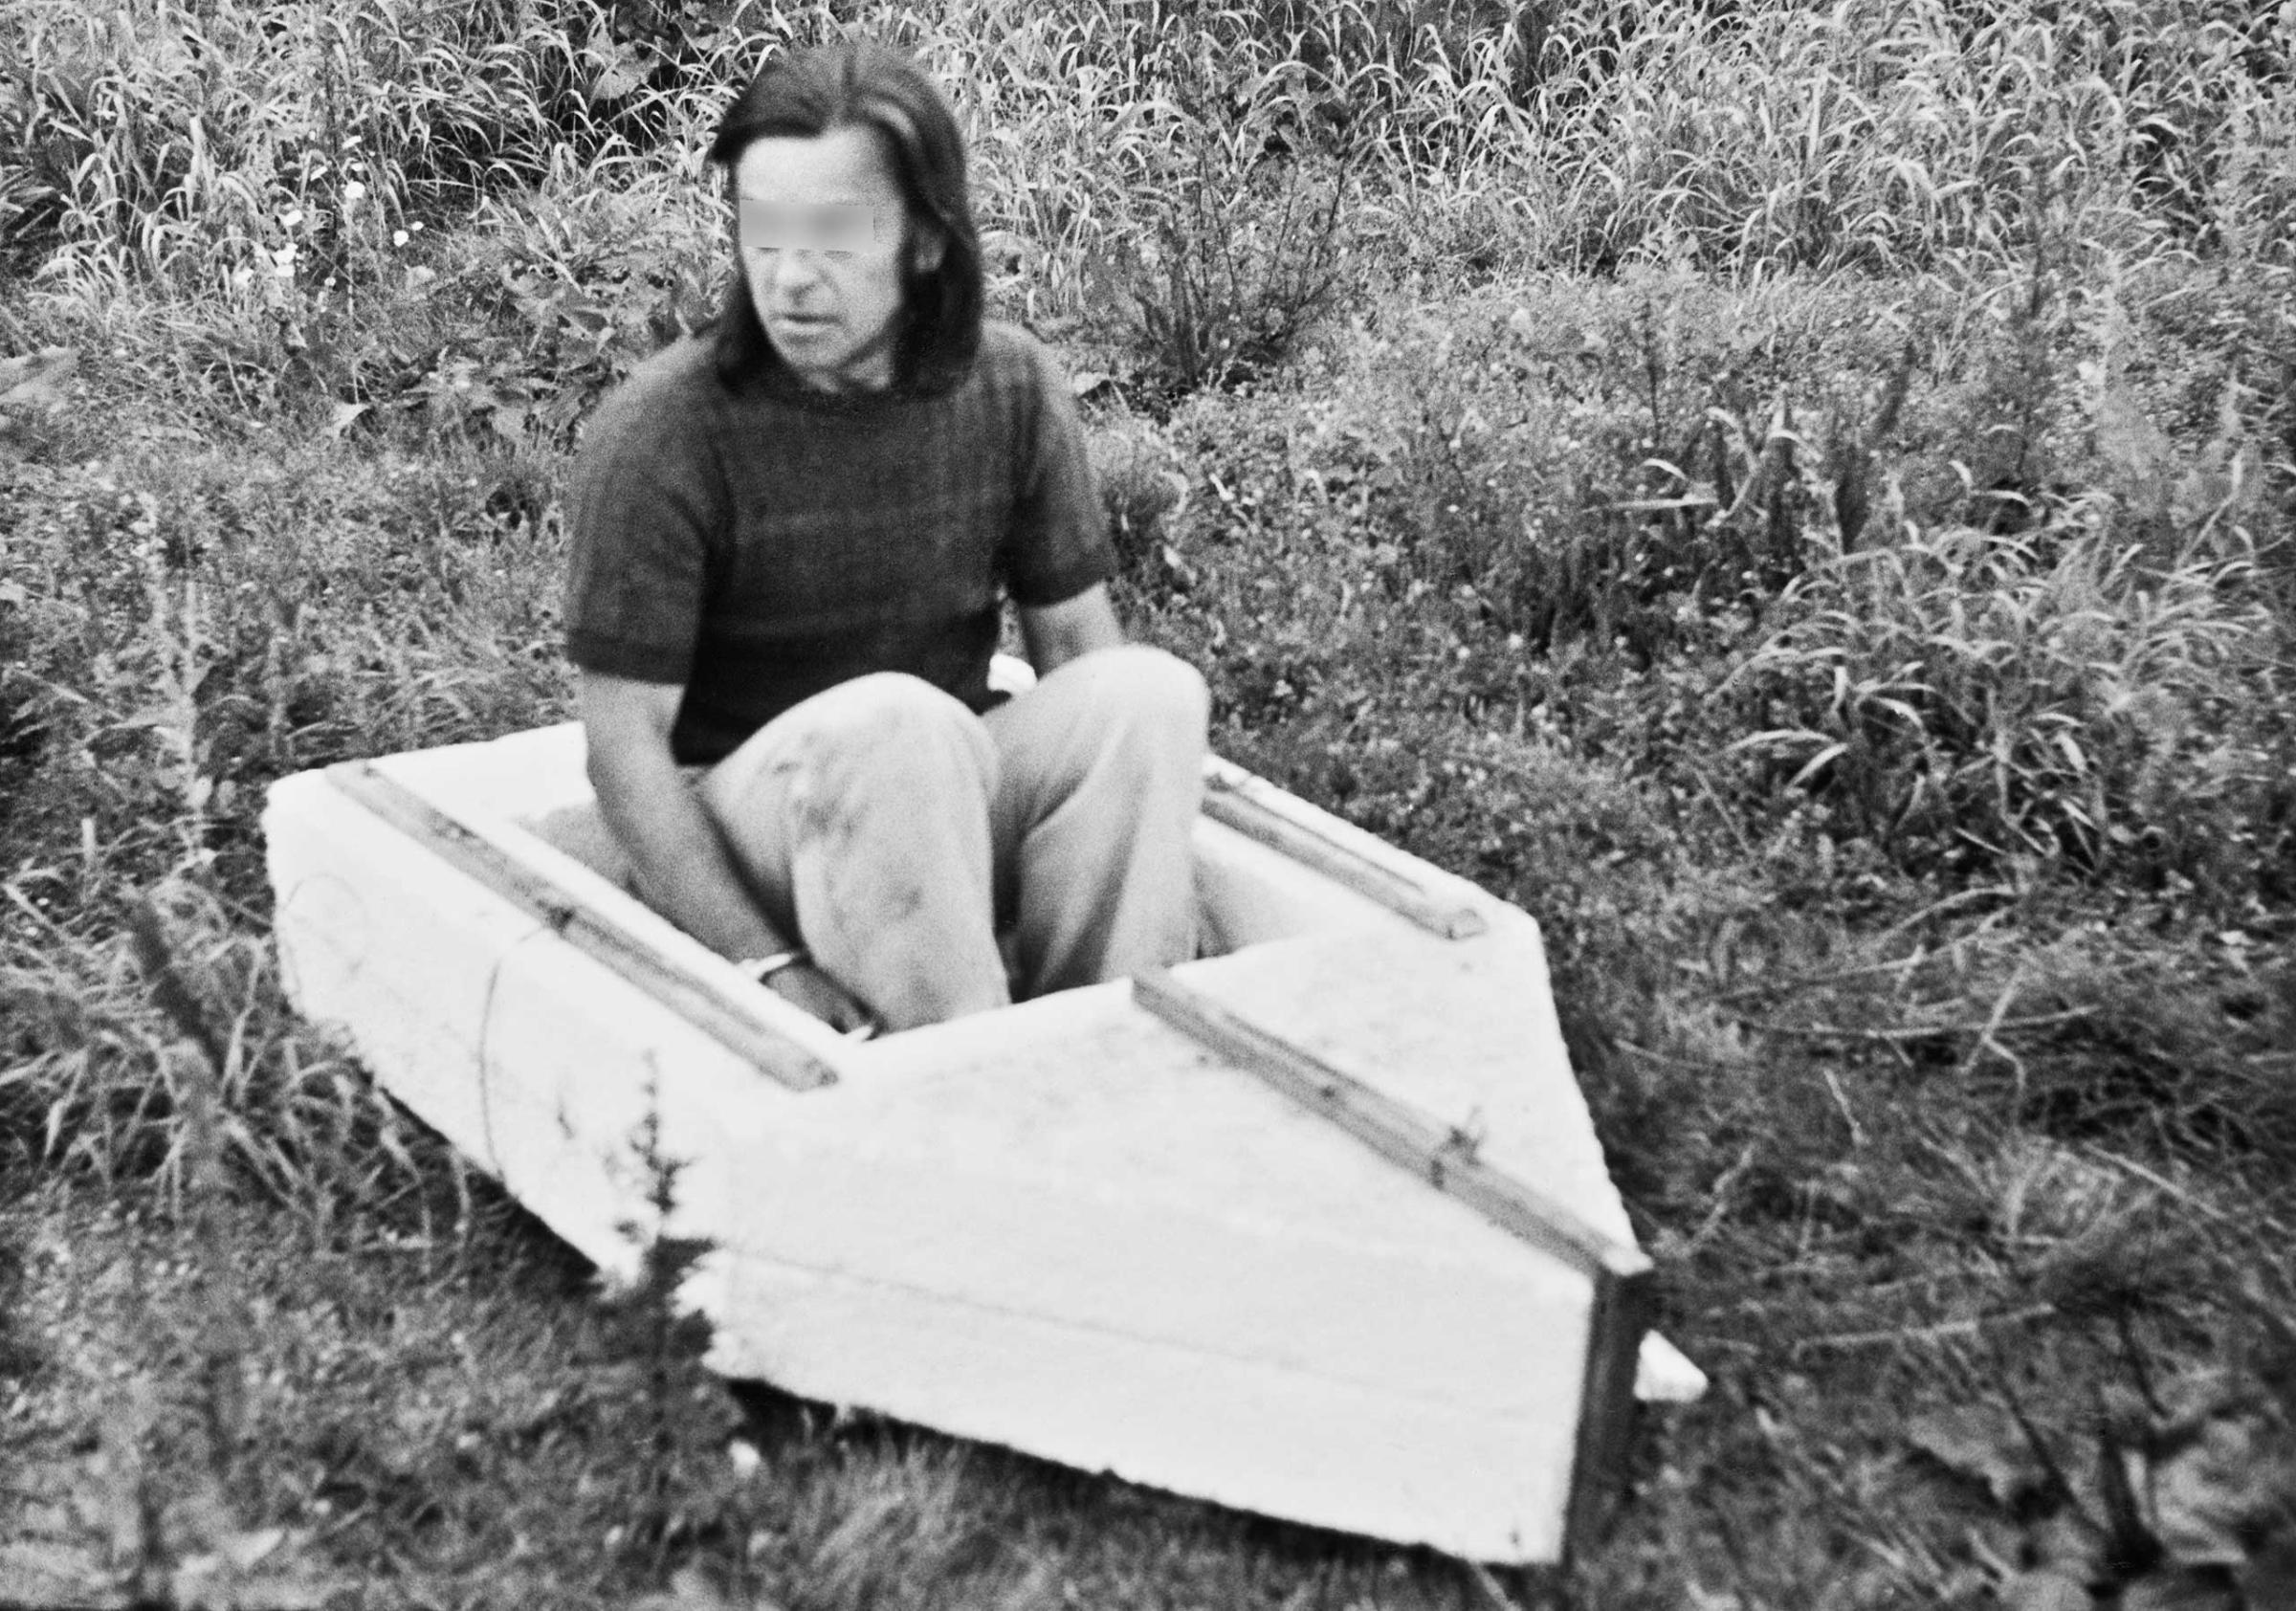 Arwed Messmer, using a print, call number BStU MfS BV RsT Abt. IX Nr. 200, Bl. 87.Reenactment of an escape attempt in a homemade raft of polystyrene slabs, nylon string, and wooden boards, with which a man wanted to flee via the Baltic coastal resort of Boltenhagen on 9 July, 1981, because he was afraid of criminal prosecution. He was apprehended in the border area before reaching the coast.